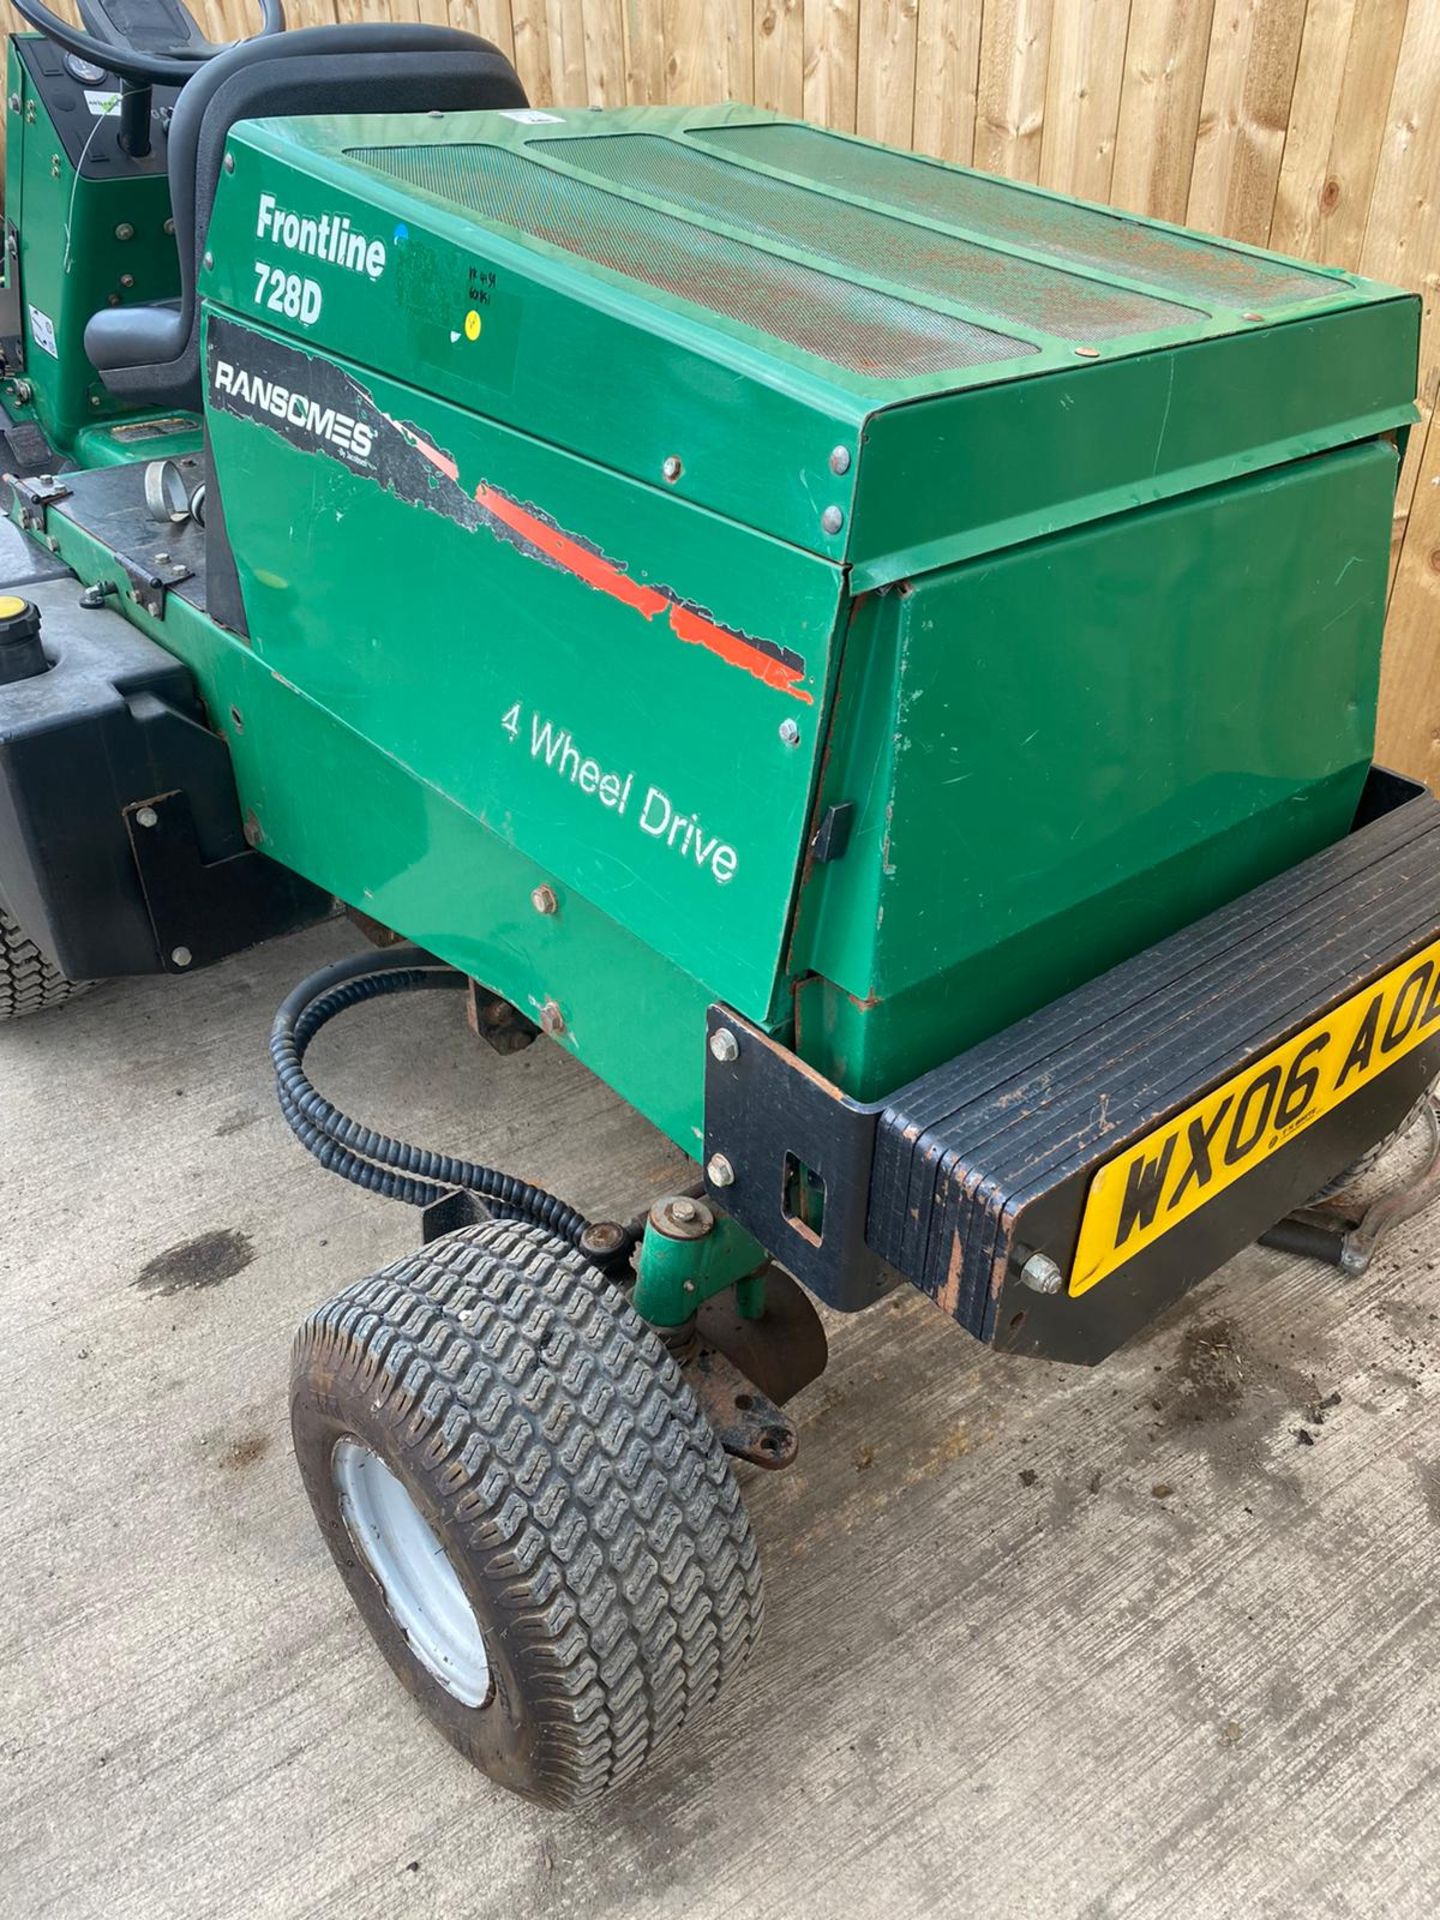 RANSOMES 728D DIESEL OUT FRONT MOWER ROAD REGISTERED LOCATION NOTH YORKSHIRE - Image 6 of 7